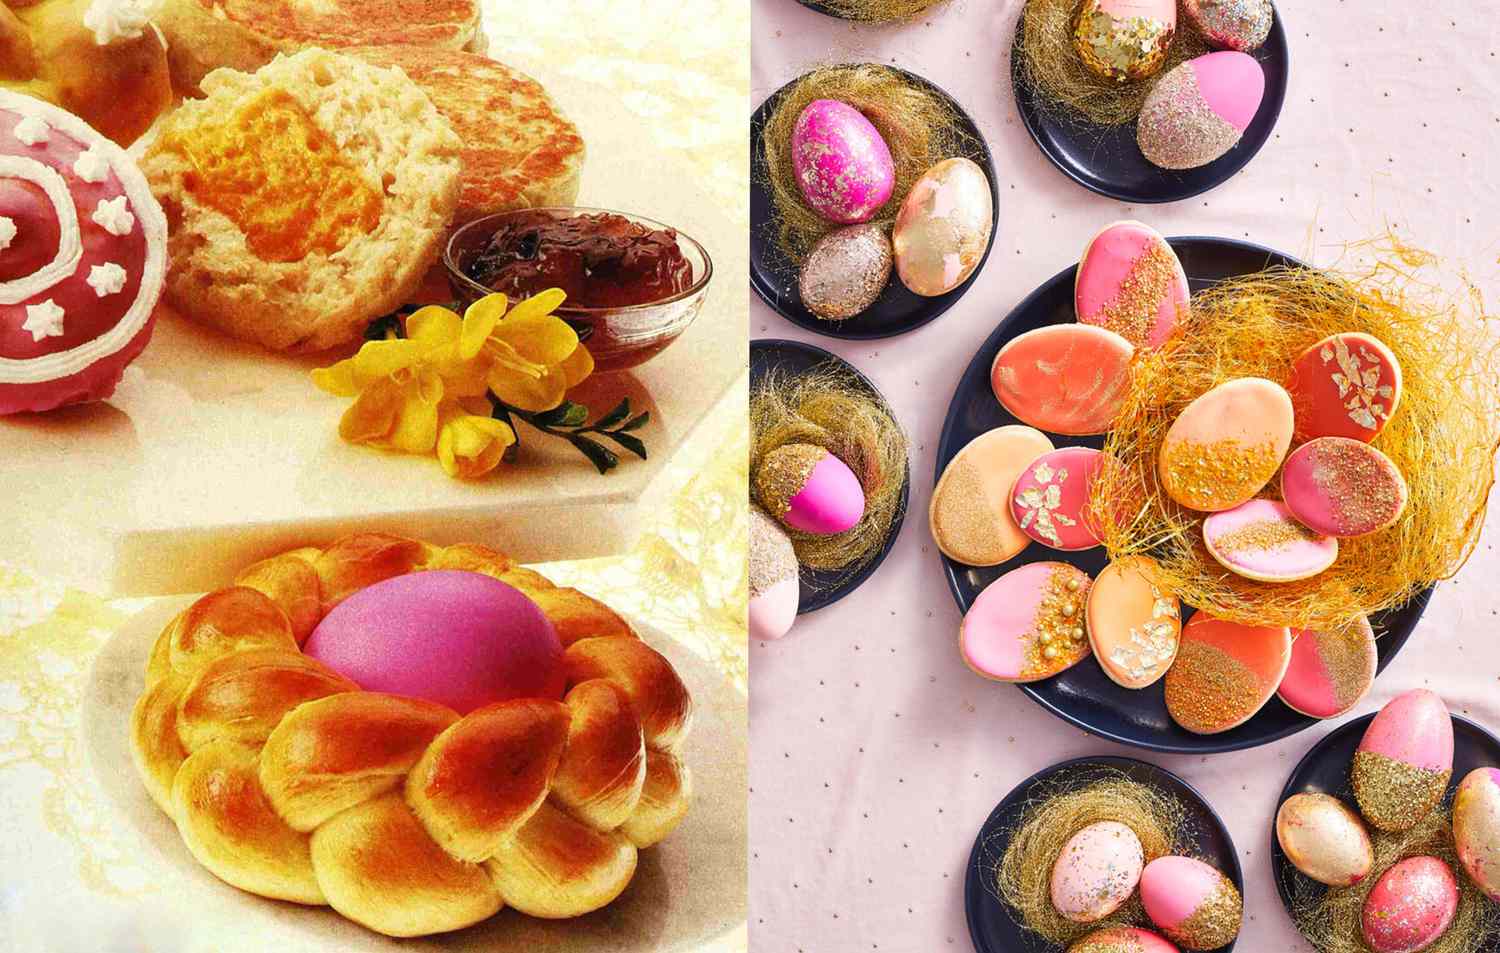 left photo of Easter breads from 1980s issue of Better Homes & Gardens. right: photo of decorated Easter eggs from April 2020 issue